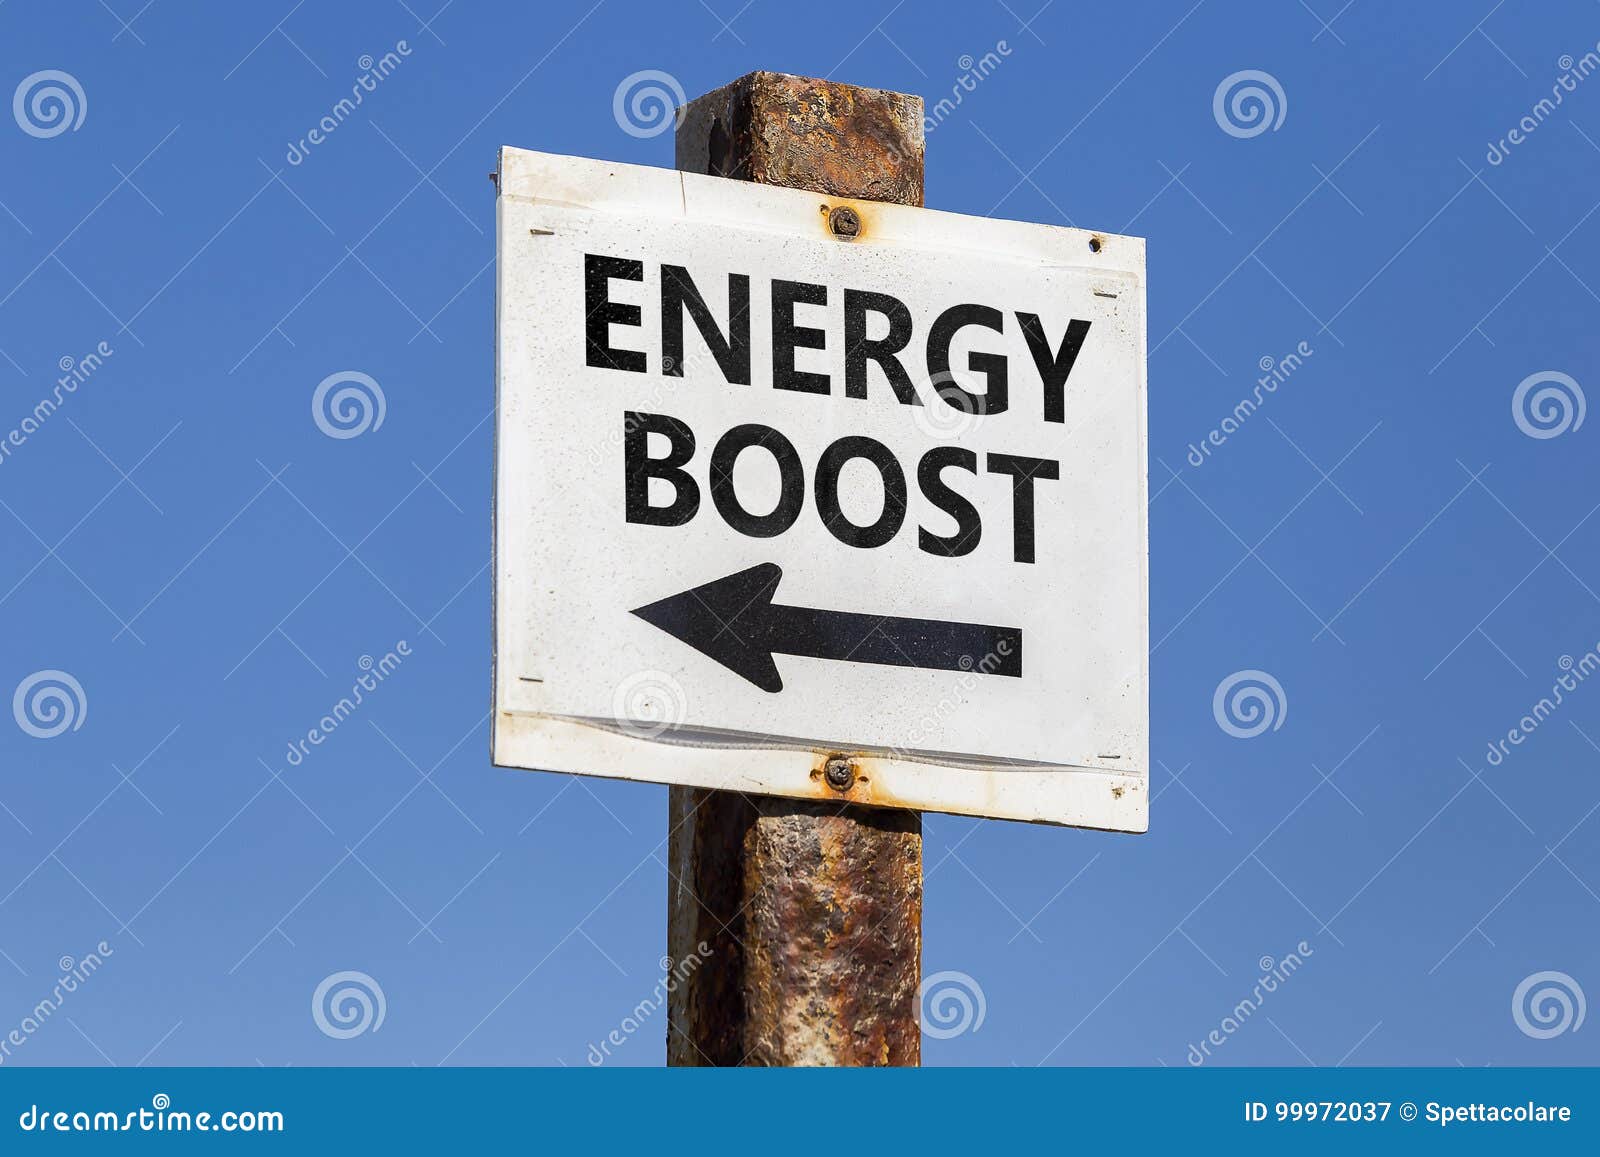 energy boost word and arrow signpost